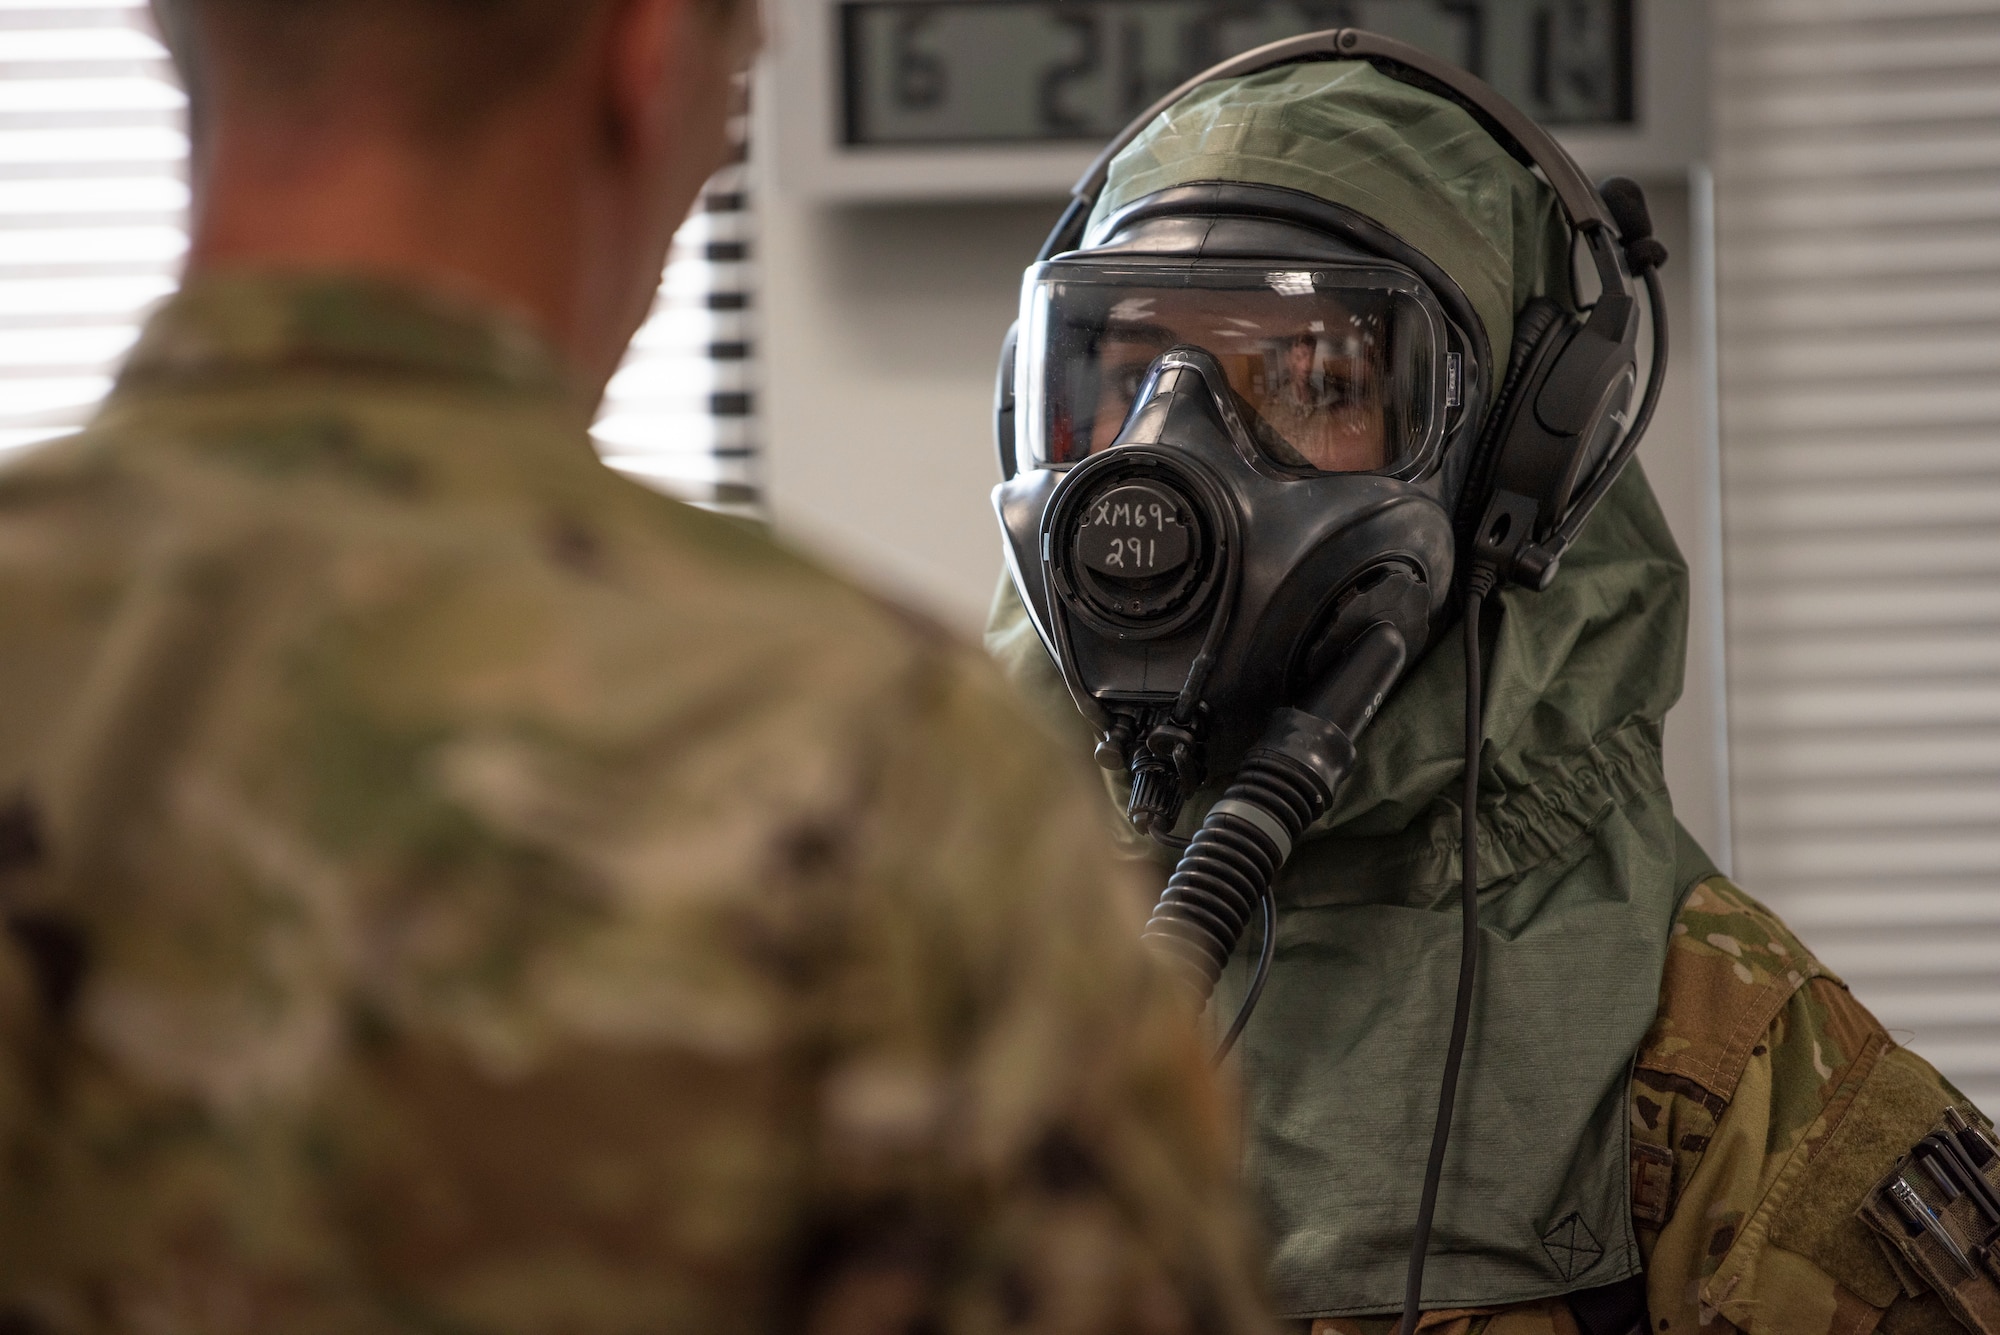 Capt. Miranda Mila, 40th Airlift Squadron pilot, tests a gas mask at Dyess Air Force Base, Texas, June 2, 2021. C-130J Super Hercules aircrew assisted in the research and development testing of the new Two-Piece Undergarment universal integrative ensemble chemical, biological, radioactive and nuclear protective equipment. (U.S. Air Force photo by Airman 1st Class Colin Hollowell)